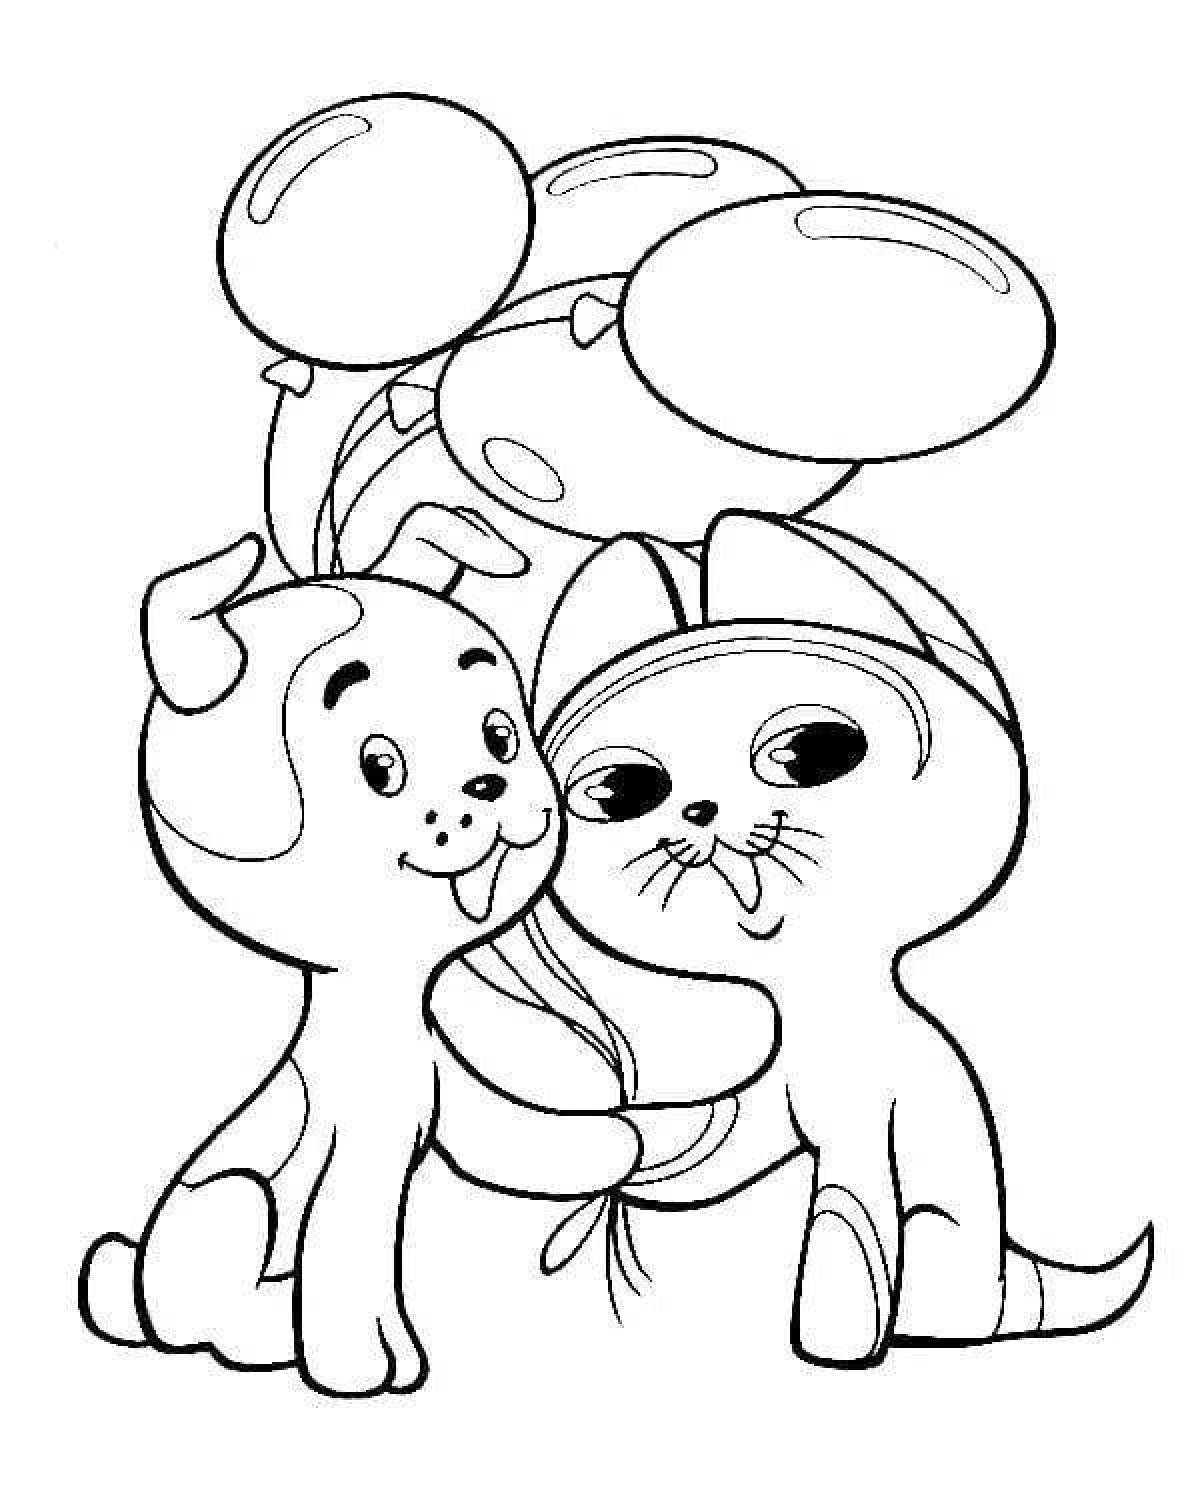 Naughty cat and dog coloring page